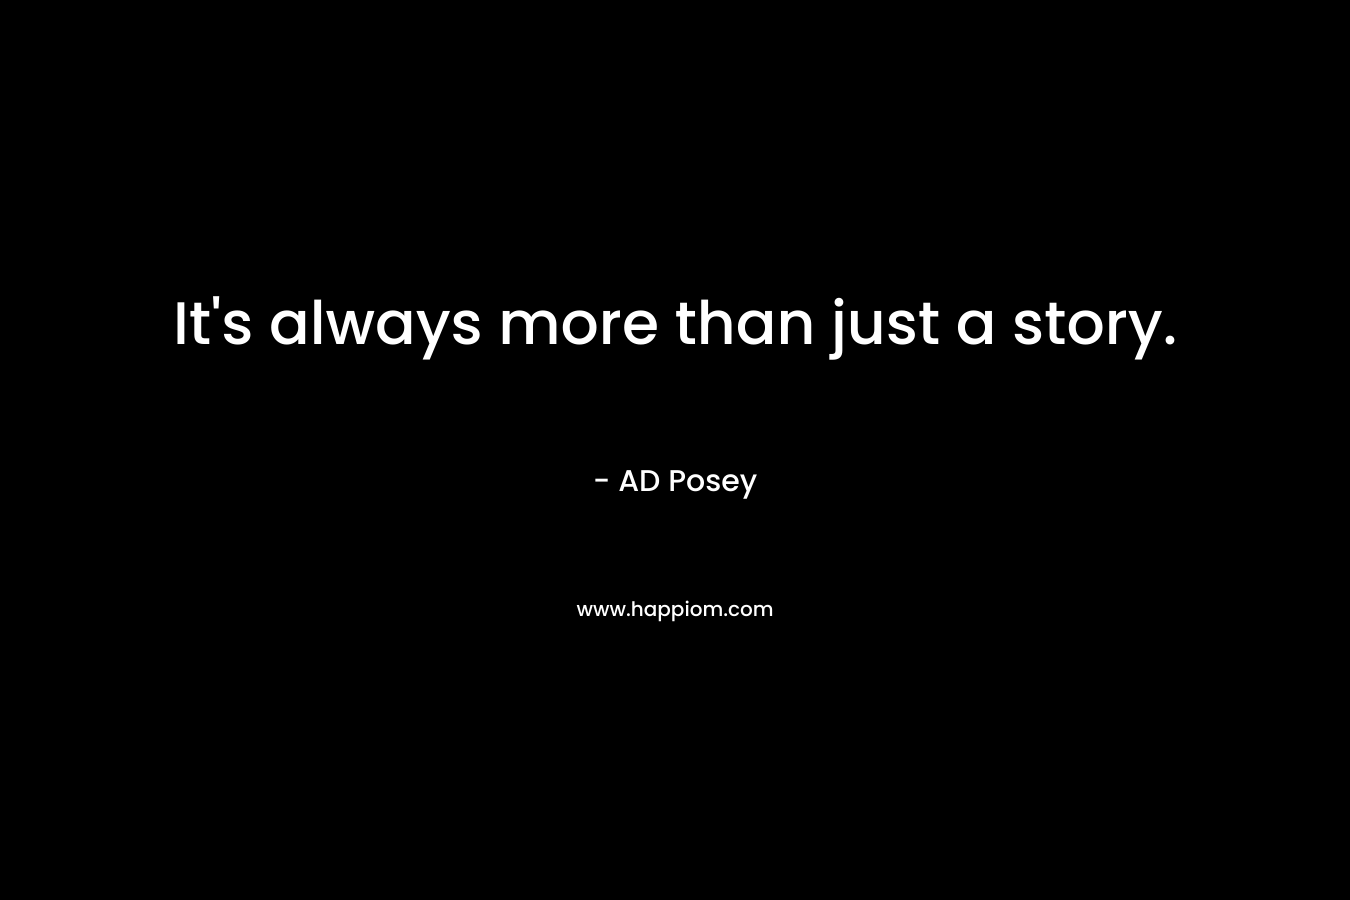 It's always more than just a story.